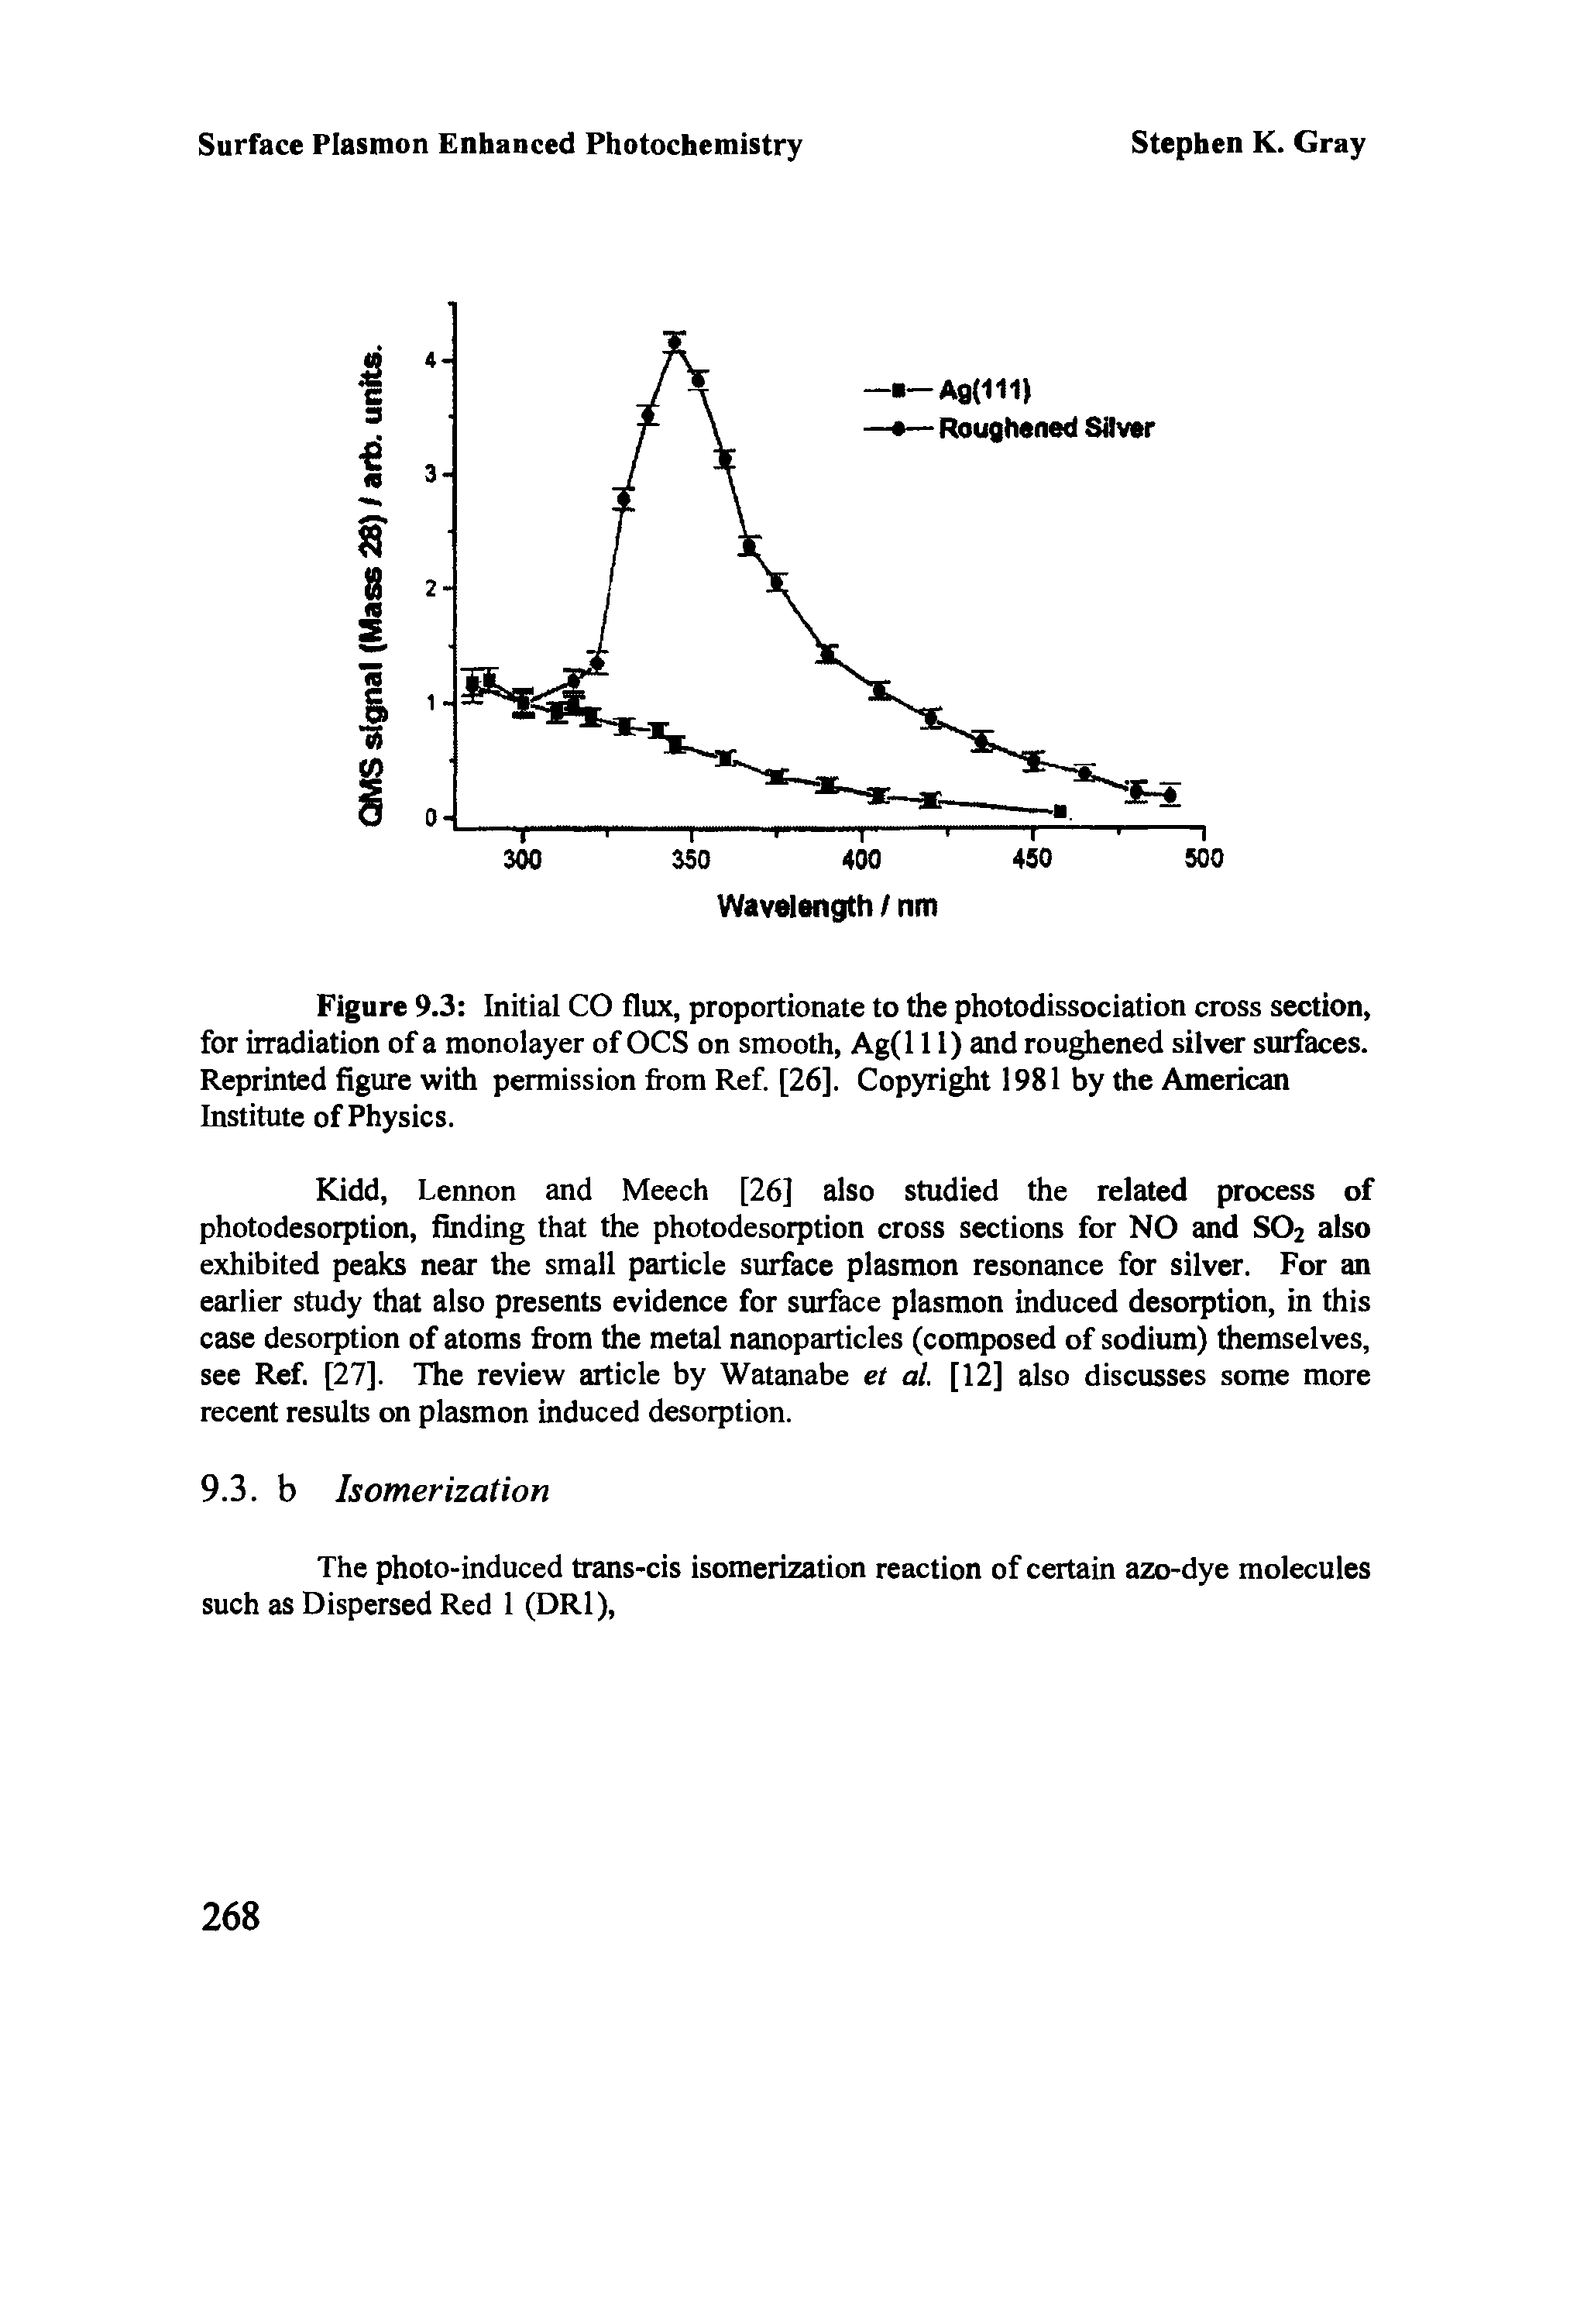 Figure 9.3 Initial CO flux, proportionate to the photodissociation cross section, for irradiation of a monolayer of OCS on smooth, Ag(l 11) and roughened silver surfaces. Reprinted figure with permission from Ref [26]. Copyright 1981 by the American Institute of Physics.